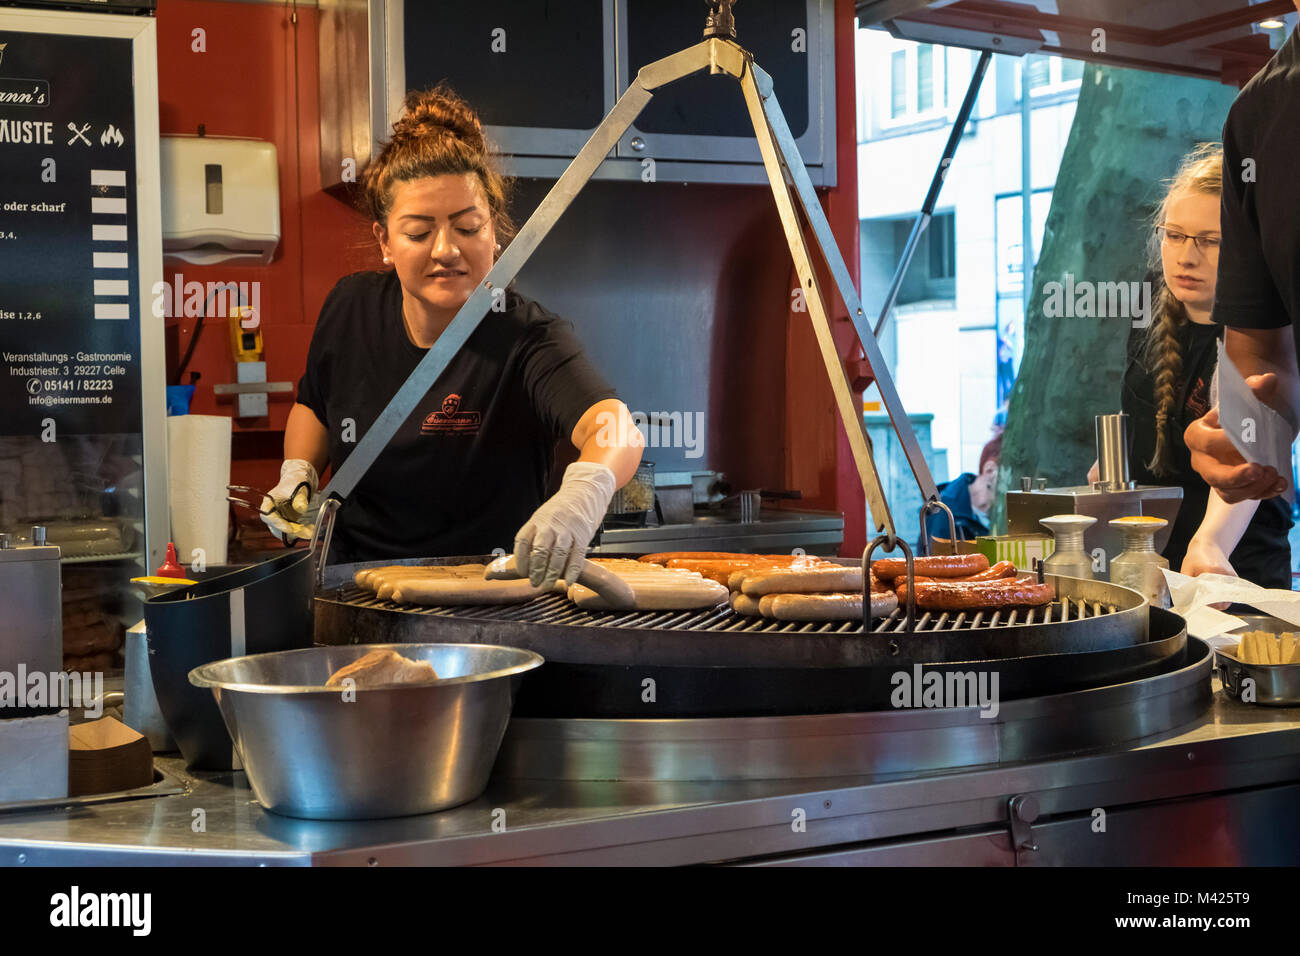 Making Currywurst, German sausage hot dogs, in Hamburg, Germany Stock Photo